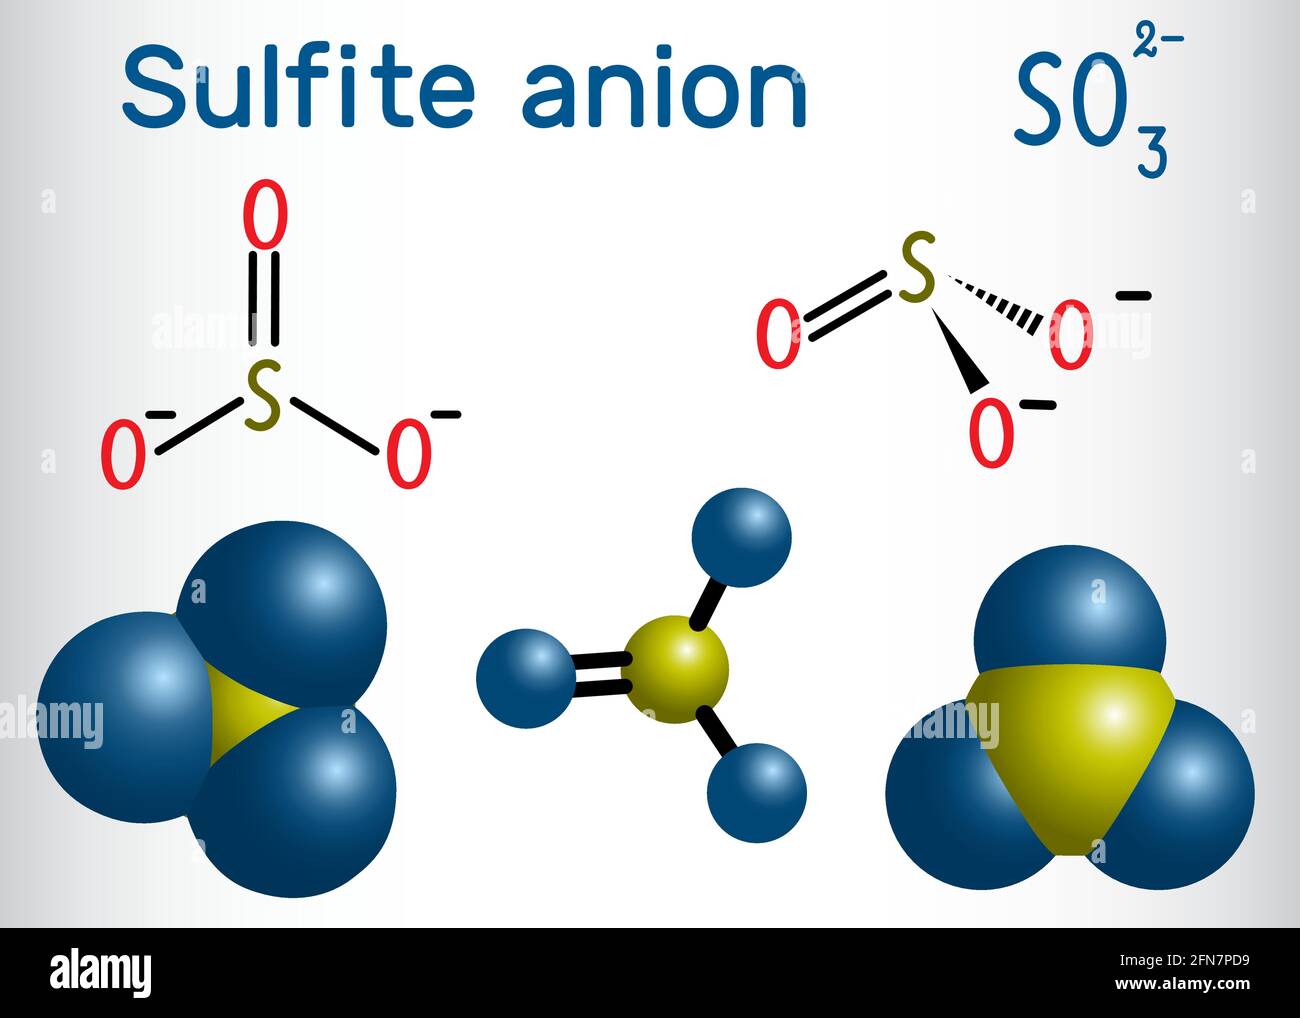 Sulfite anion molecule. Sulfites (sulphites) are used as regulated food additives. Structural chemical formula and molecule model. Vector illustration Stock Vector